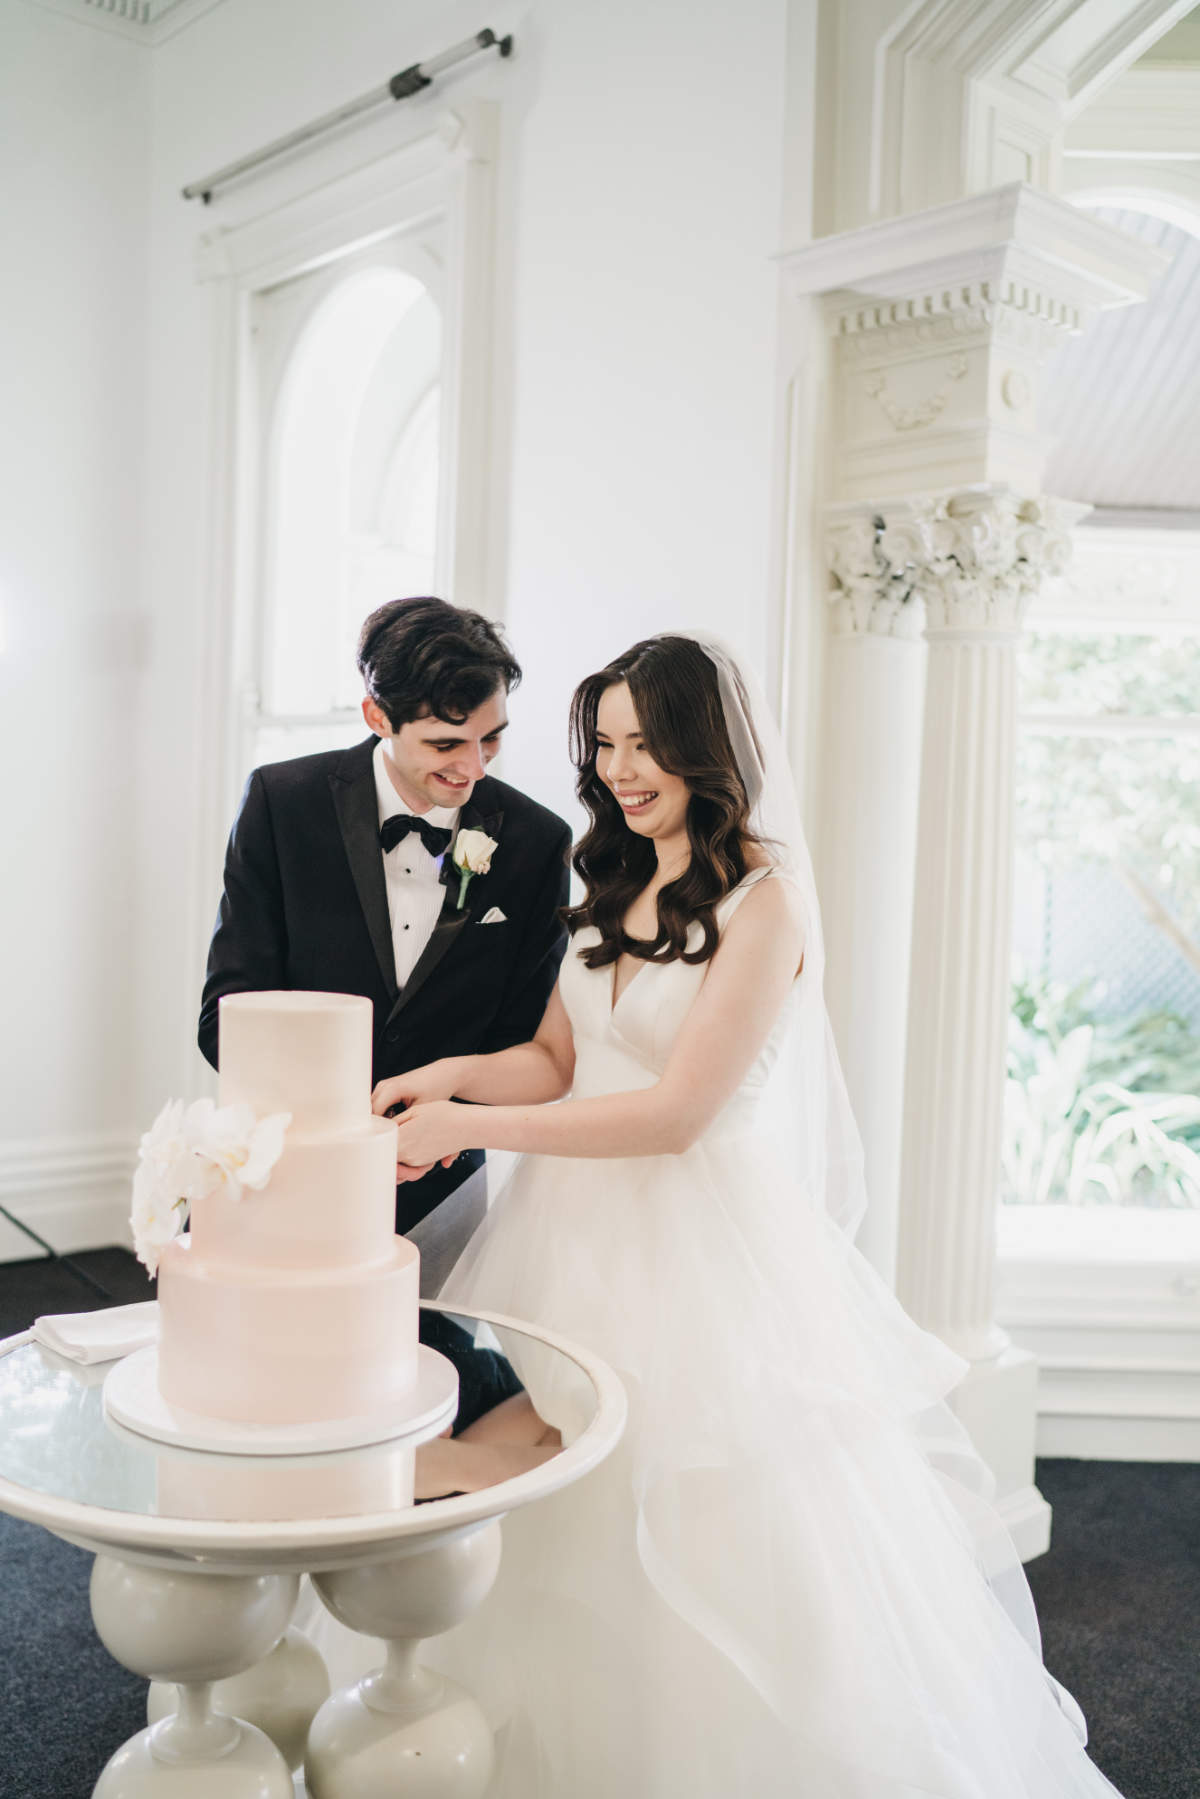 Timeless and romantic for Sophia and Kyle at their Quat Quatta wedding, Ripponlea. Photos by Kairos Works.